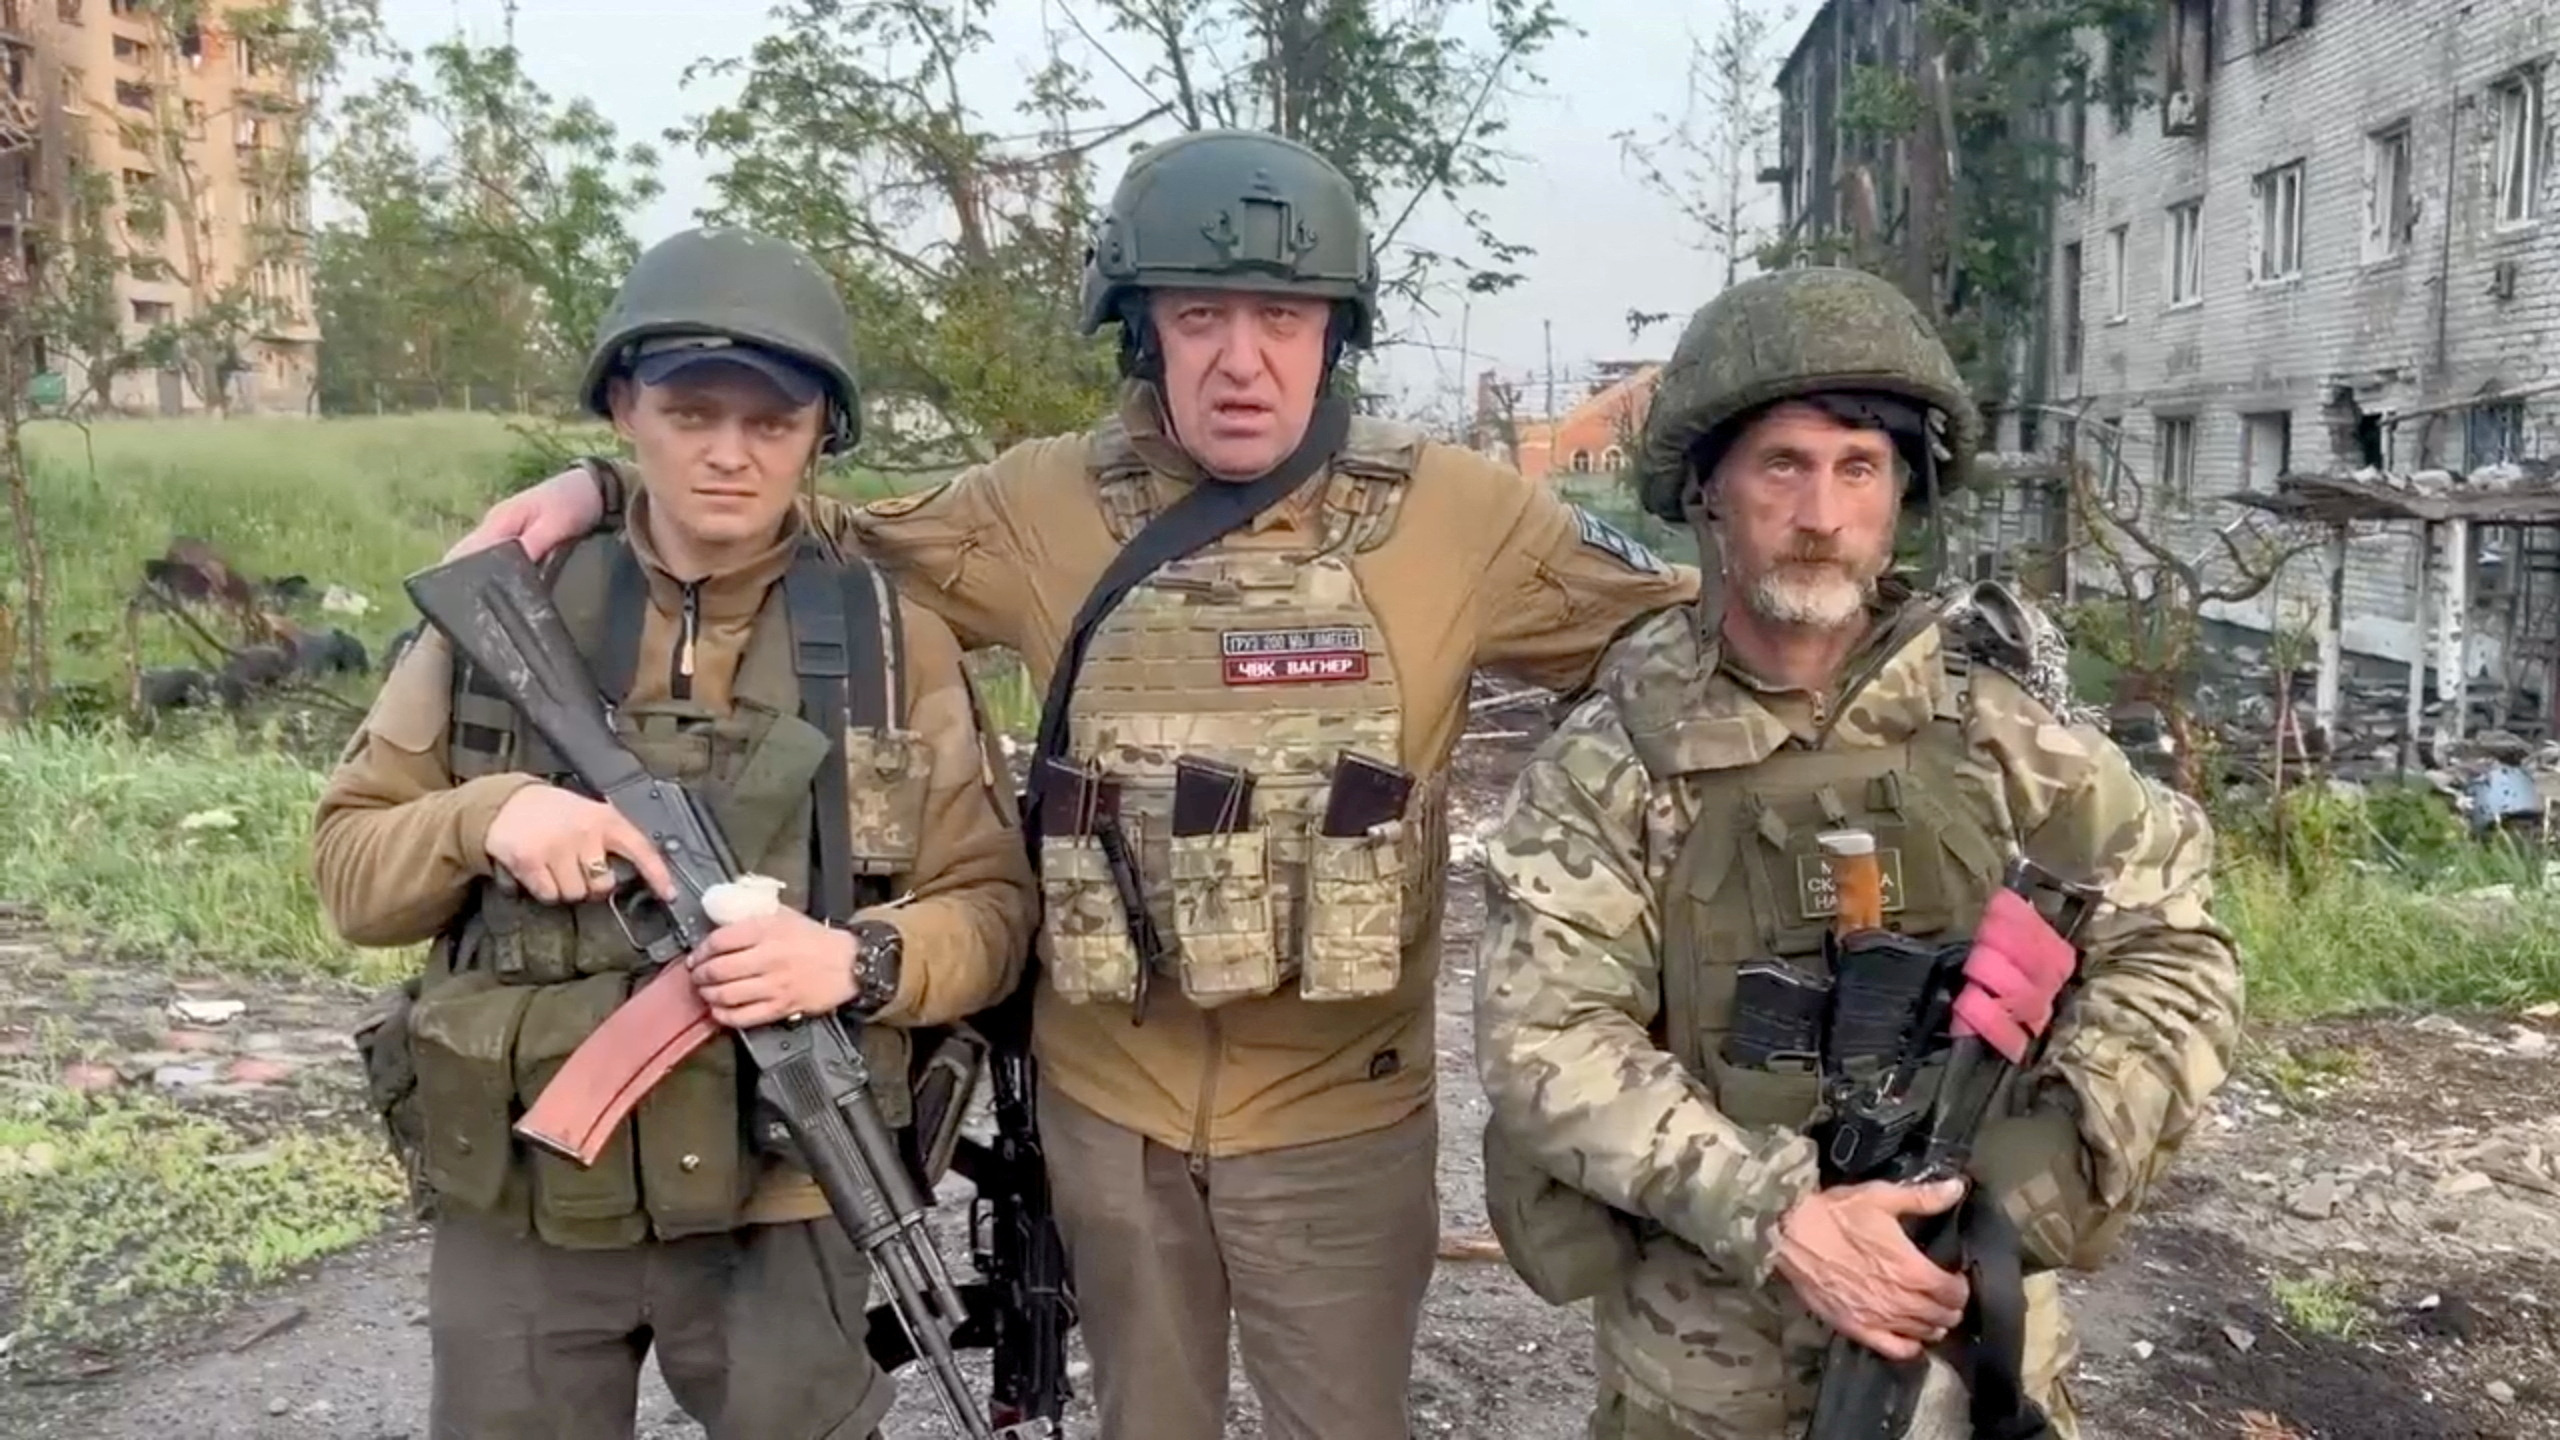 The founder of the private mercenary group Wagner, Yevgeny Prigozhin, poses with the mercenaries "Pepper" y "Dolik" during a statement about the start of the withdrawal of his forces from Bakhmut and the handing over of their positions to Russian regular troops, in the course of the conflict between Russia and Ukraine in Bakhmut, Ukraine, in this still image taken from a video released on May 25, 2023 (Reuters)